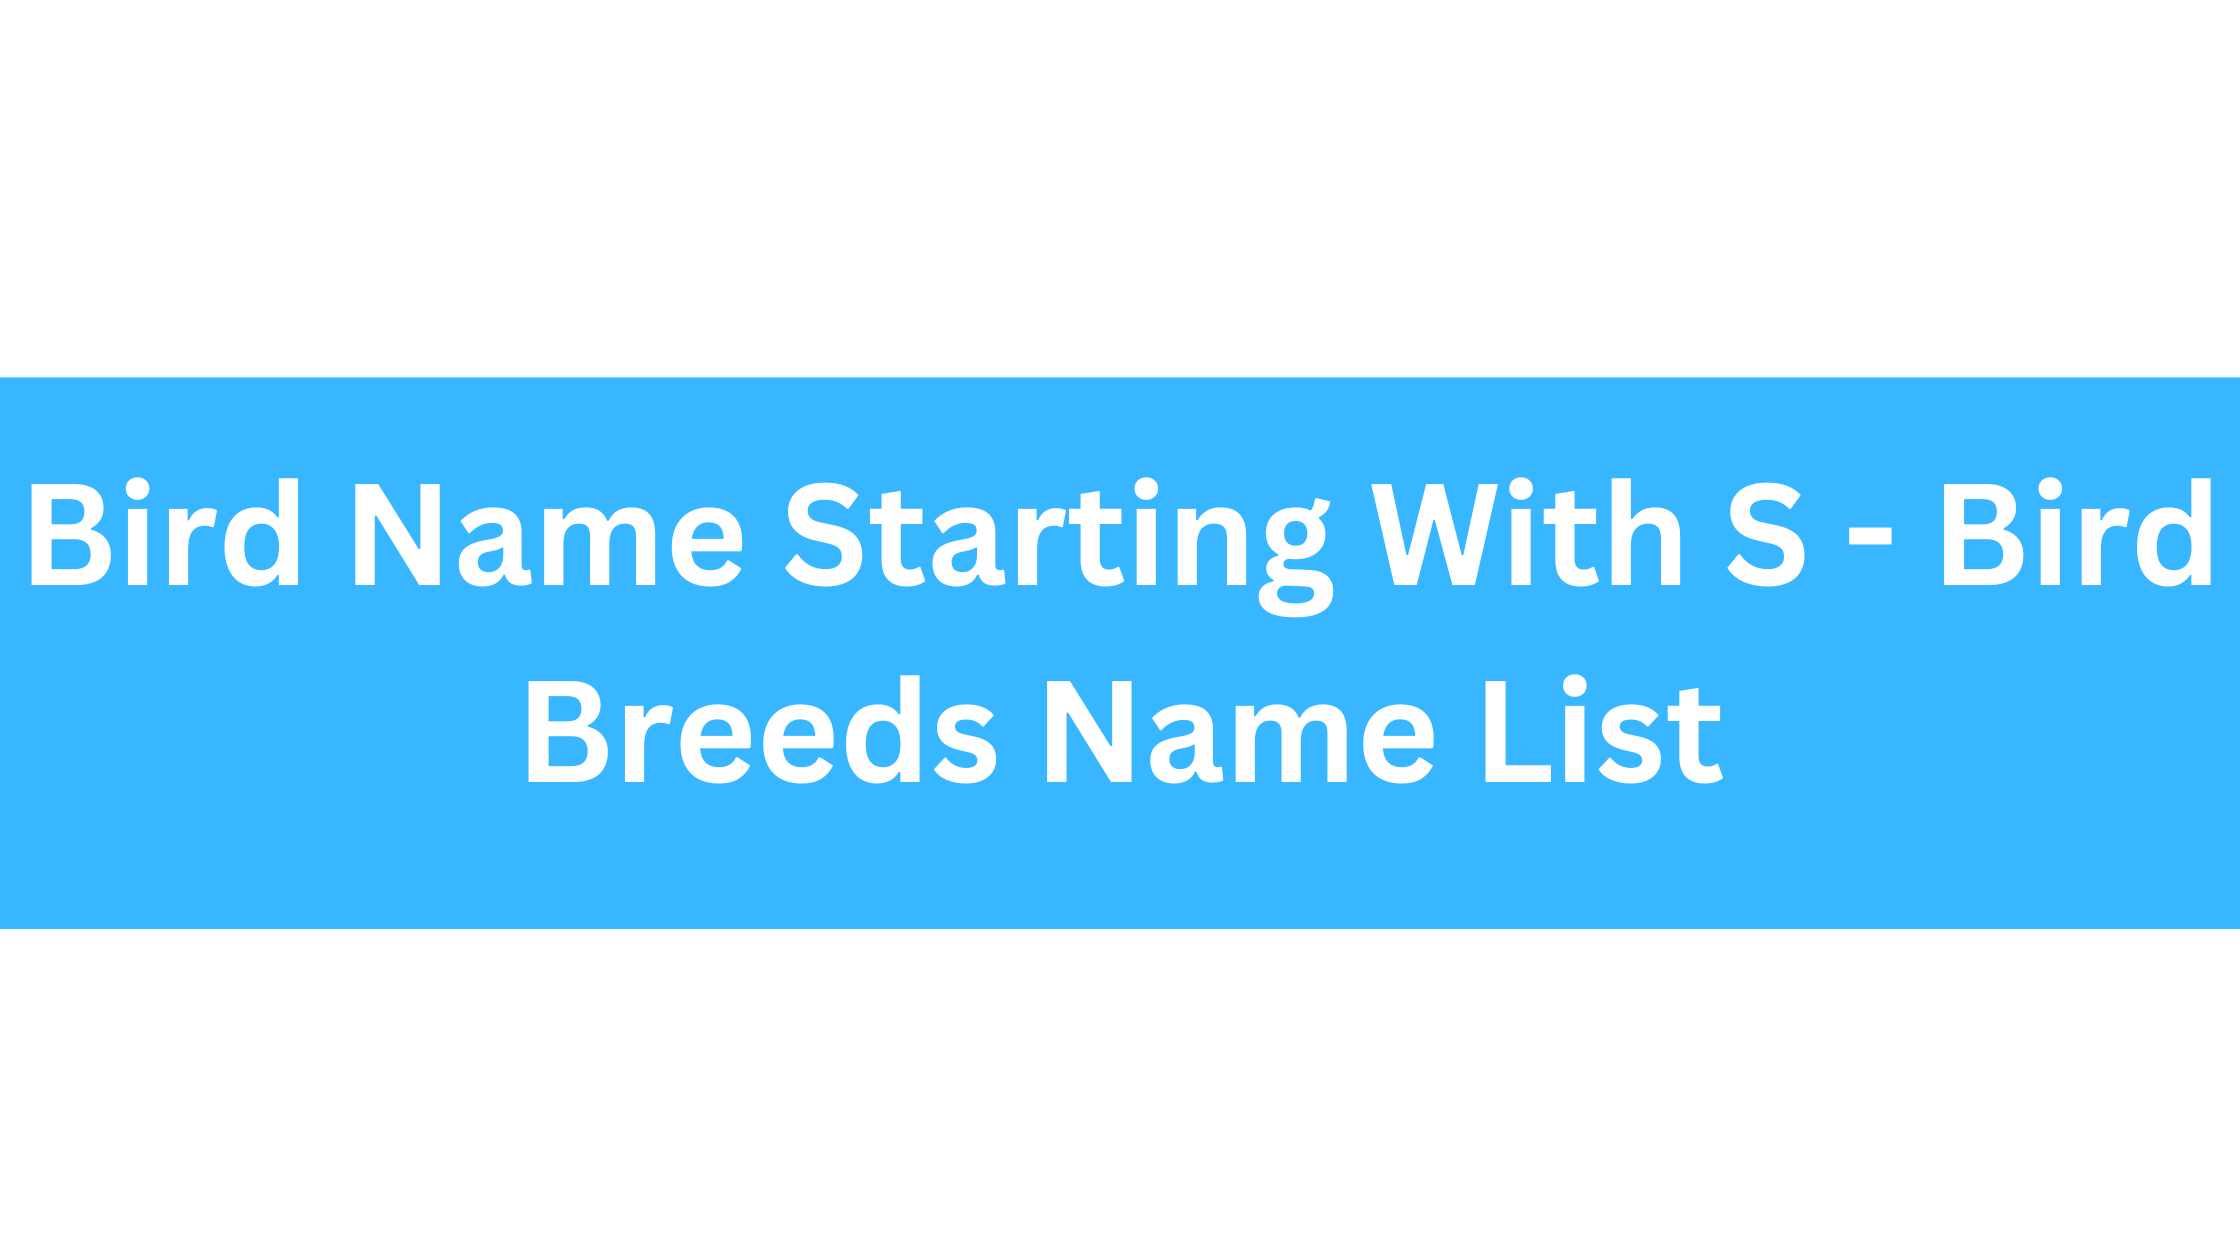 Bird Name Starting With S